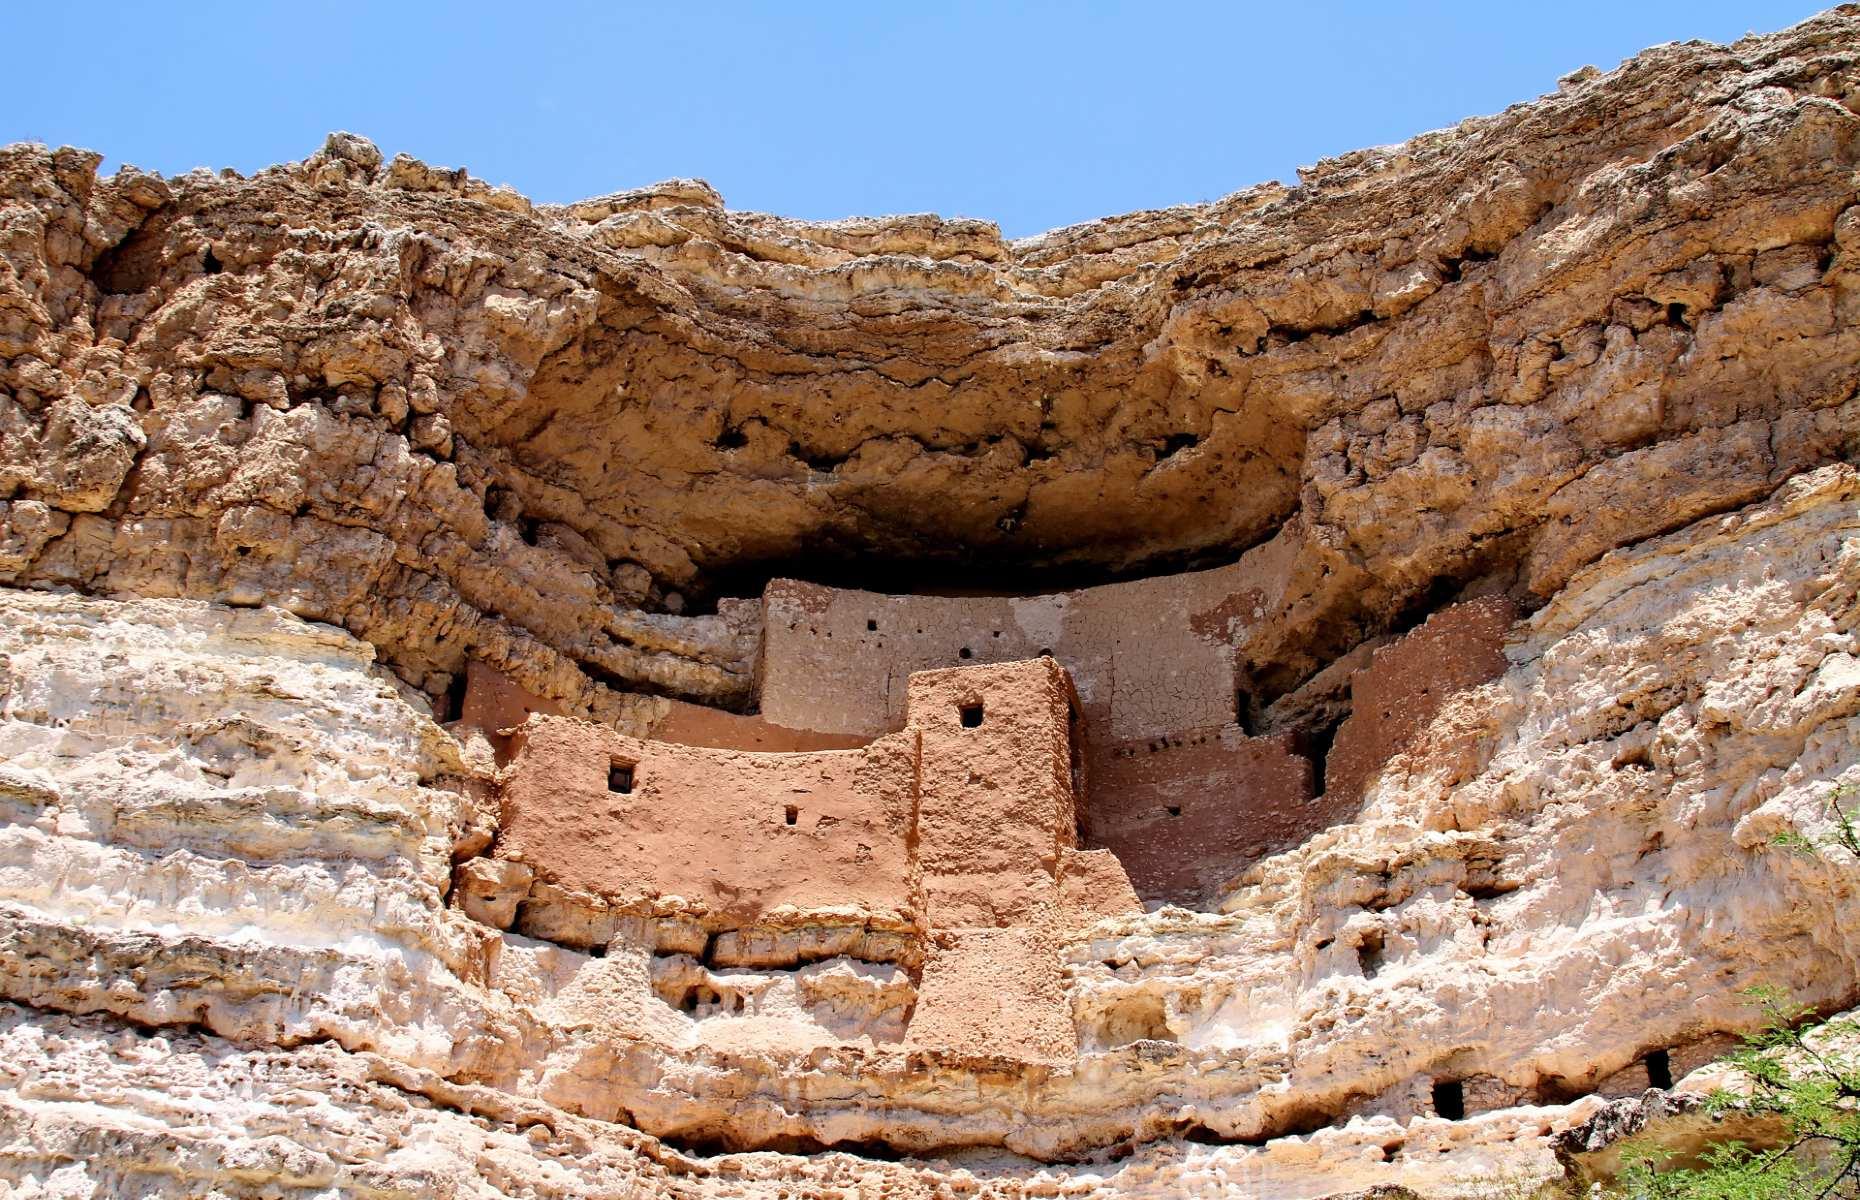 <p>With its impressive location, tucked in the limestone cliffs in the desert of Camp Verde, Montezuma Castle is sort of like an ancient skyscraper. Towing some 80 feet (20m) above the valley floor, the 20-room residence was built by the Sinagua people, beginning in around AD 1100, and served as an important shelter to escape floods. It was among the first four sites given the designation of National Monument back in 1906, with the site also including further dwellings around Montezuma Well, six miles (9.7km) from the castle.</p>